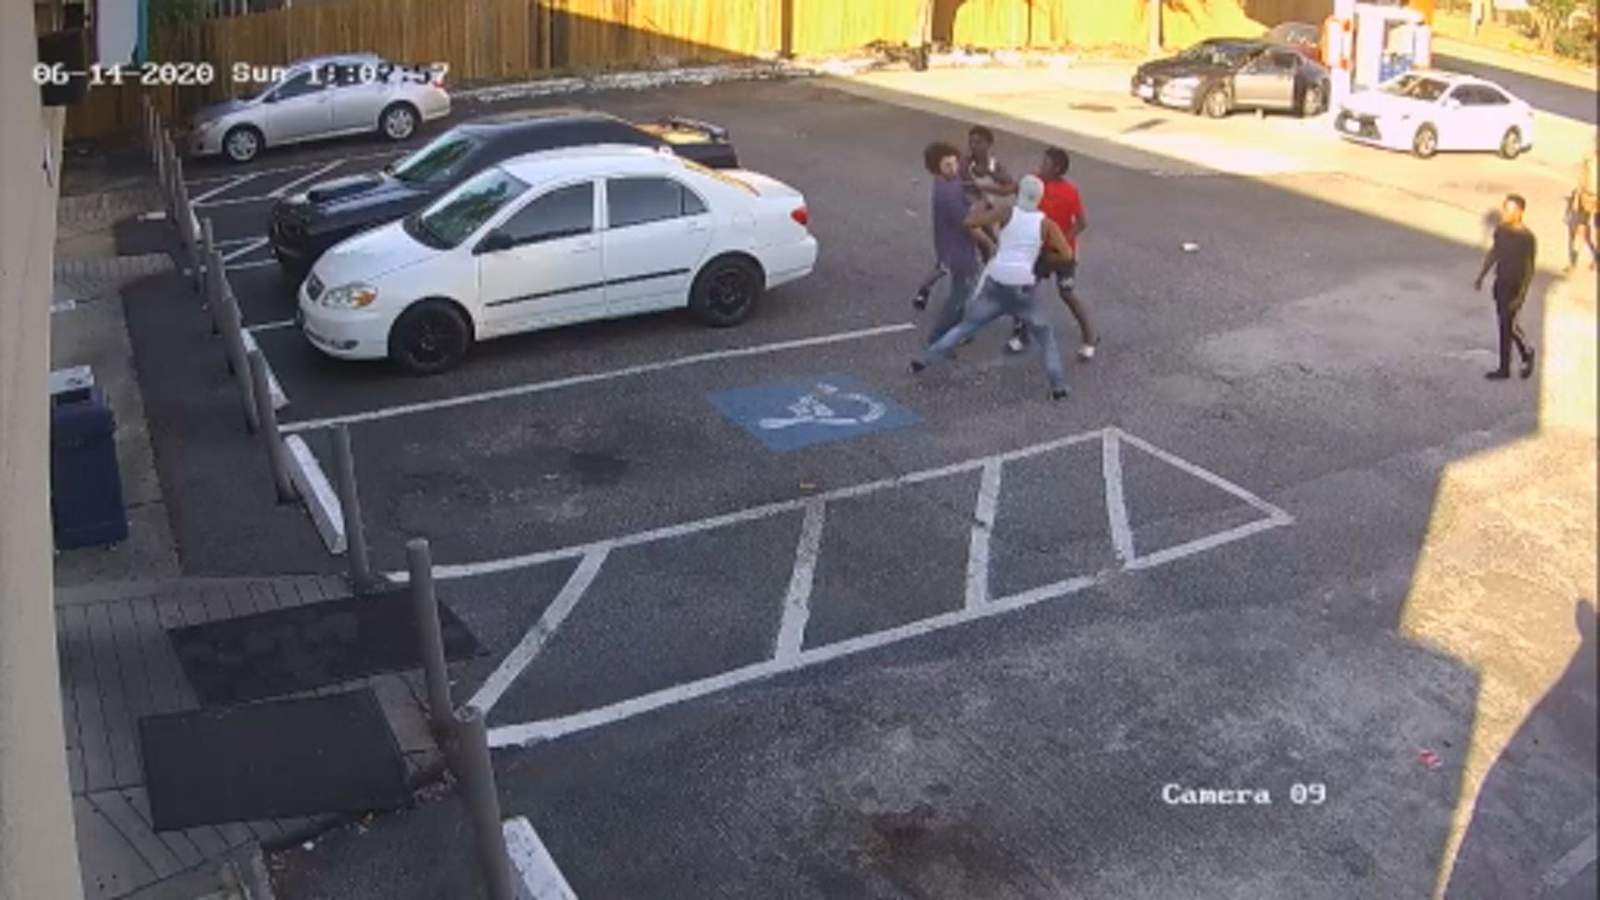 VIDEO: Man brutally attacked, taunted by group outside local gas station